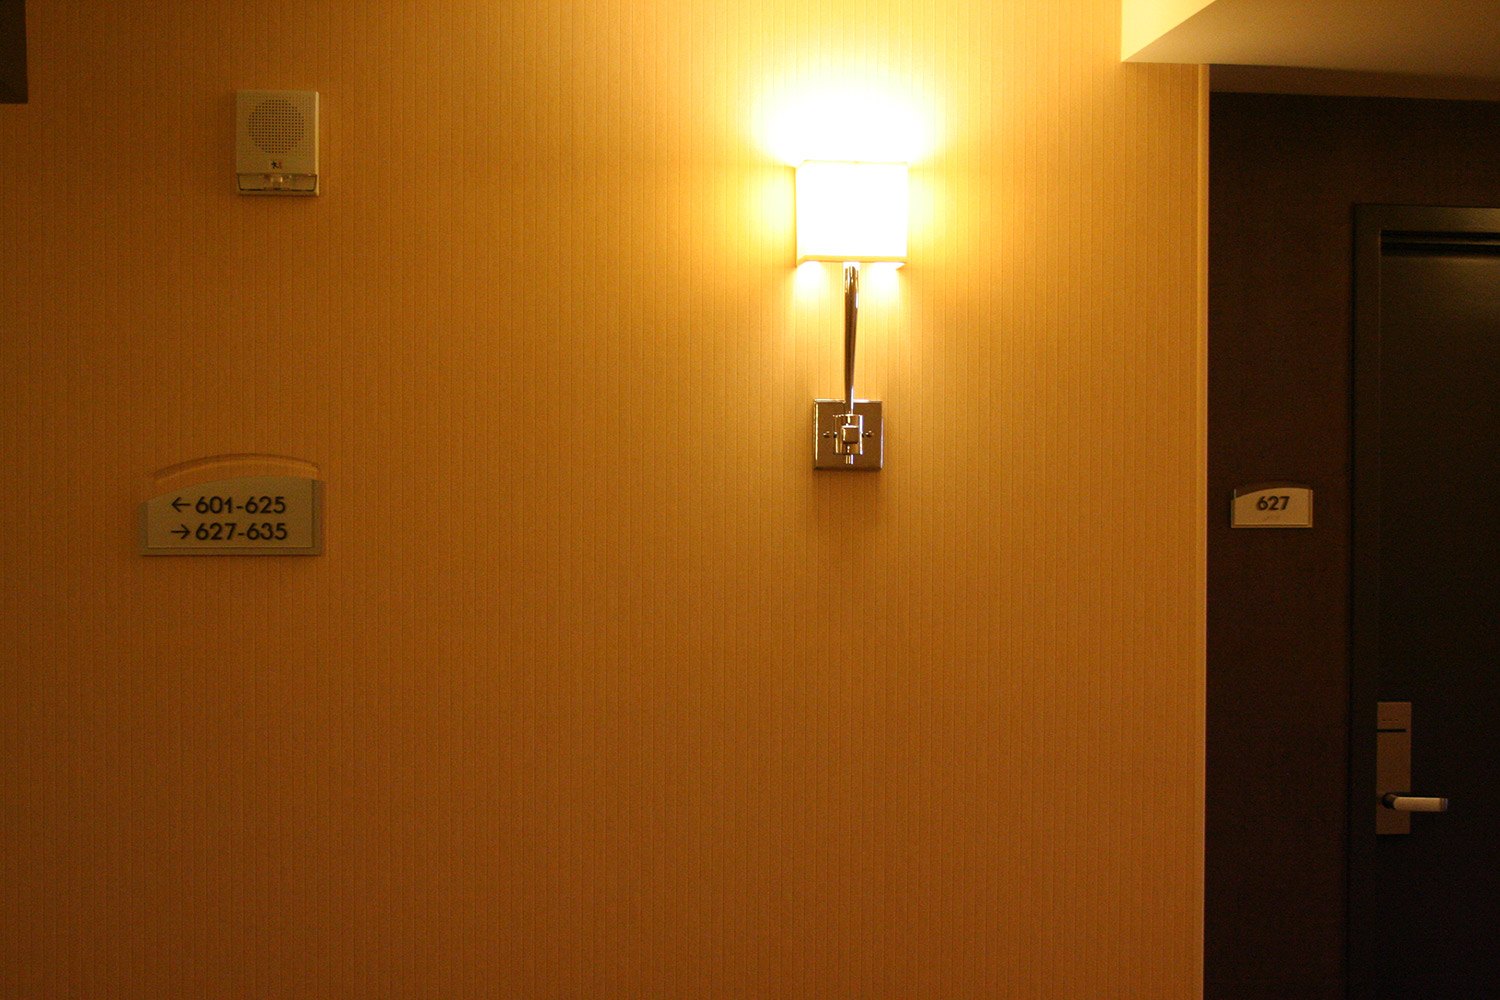 AS_Hilton-Room-Finding-and-Room-Number_12'08